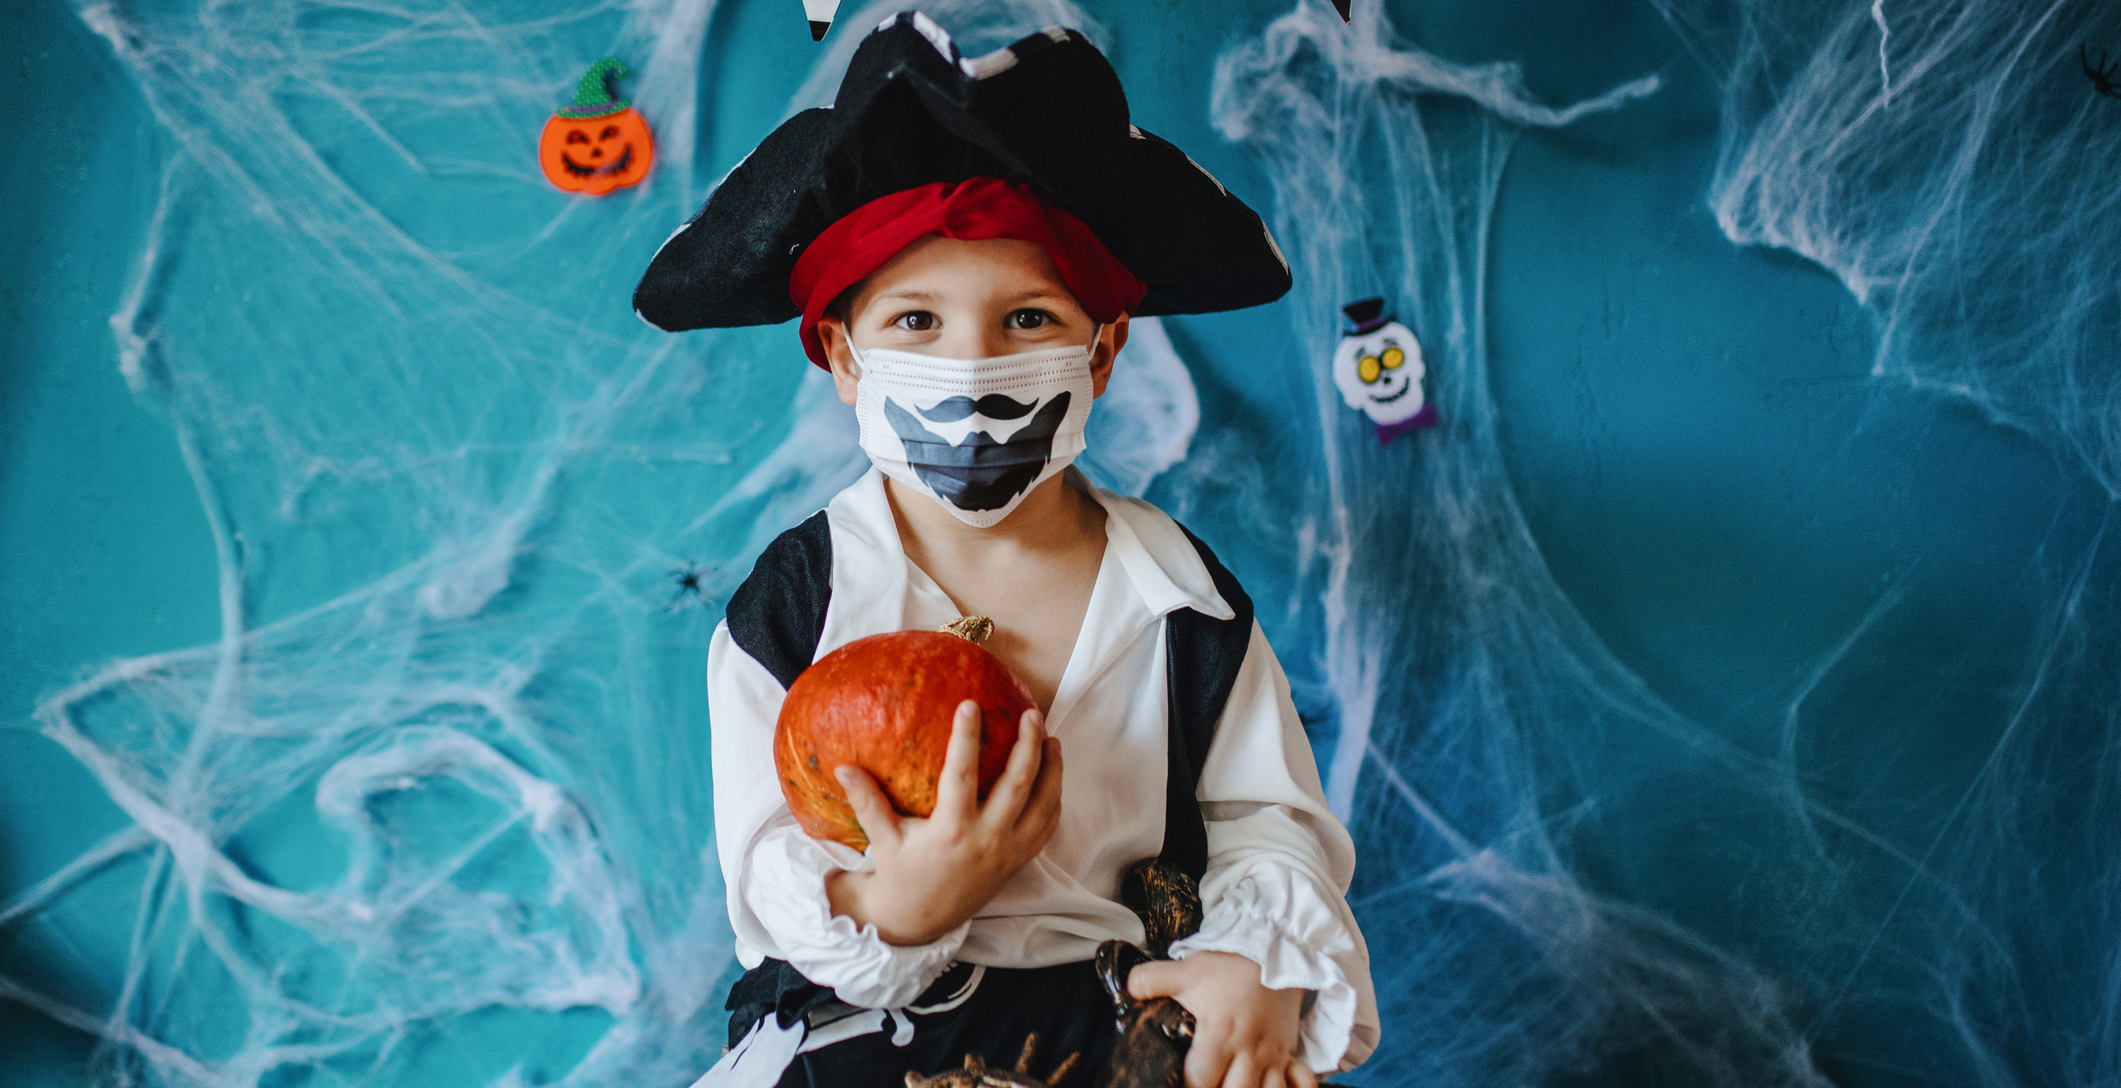 Boy in Pirate Costume Wearing a Mask